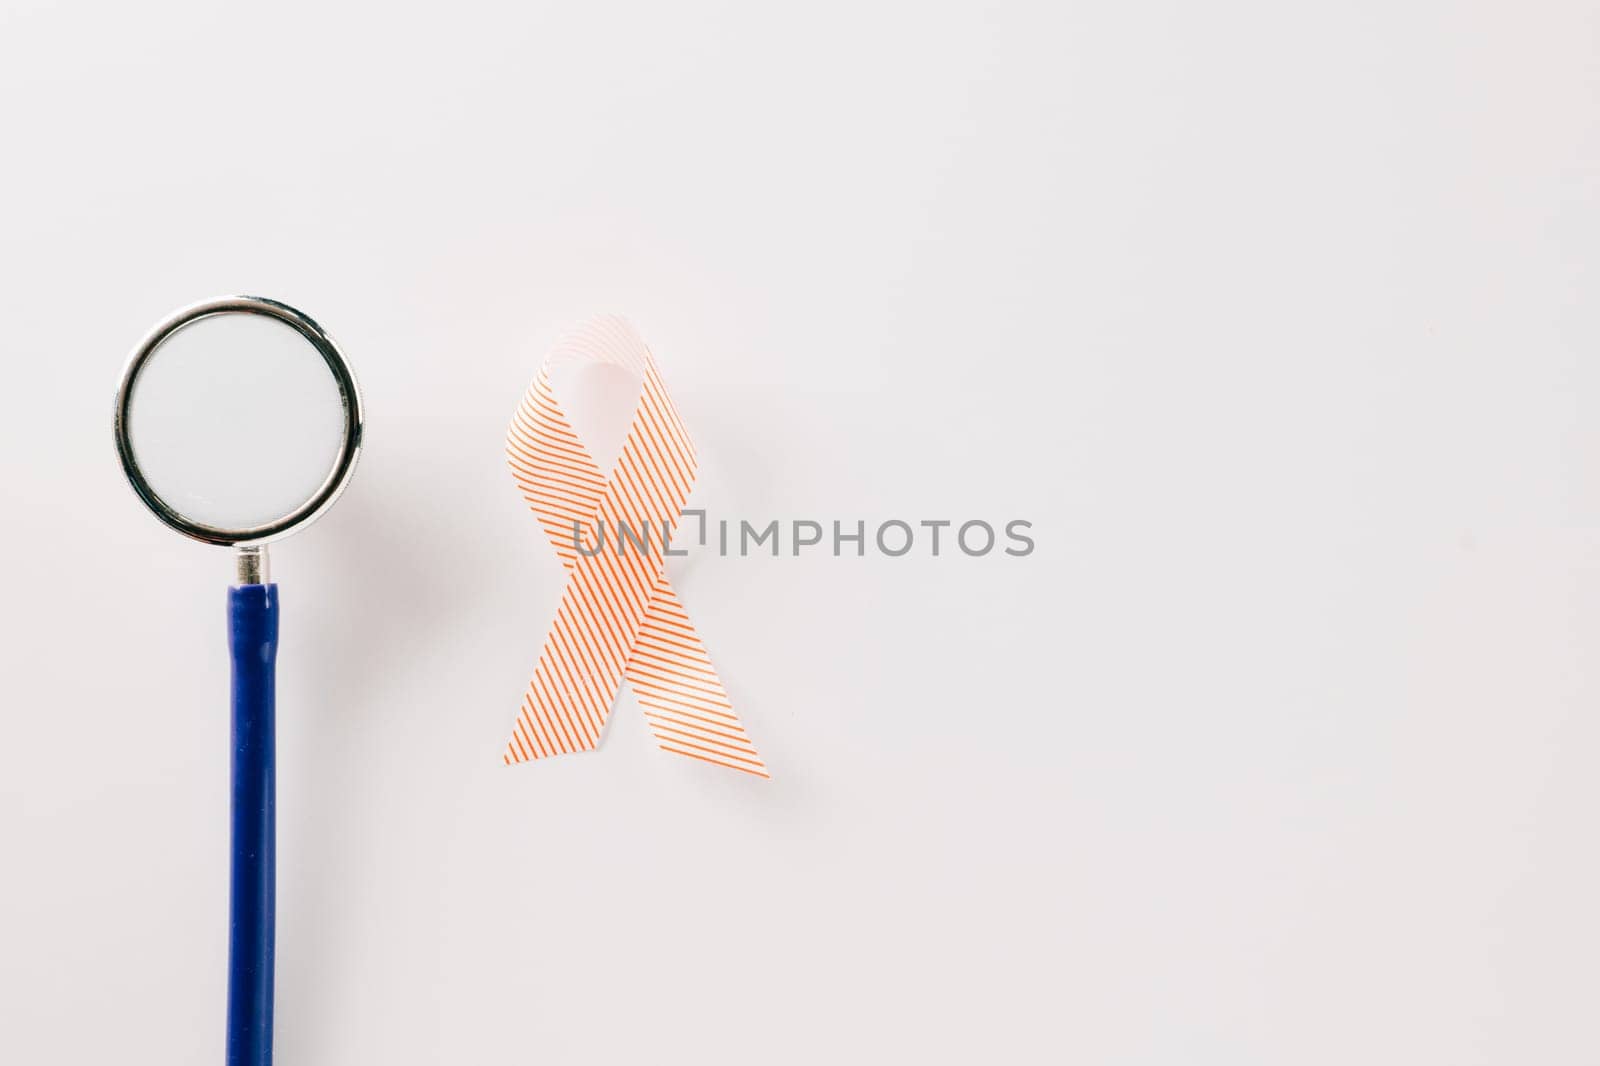 Pink awareness ribbon sign and stethoscope of International World Cancer Day campaign month isolated on white background with copy space, concept of medical and health care support, 4 February